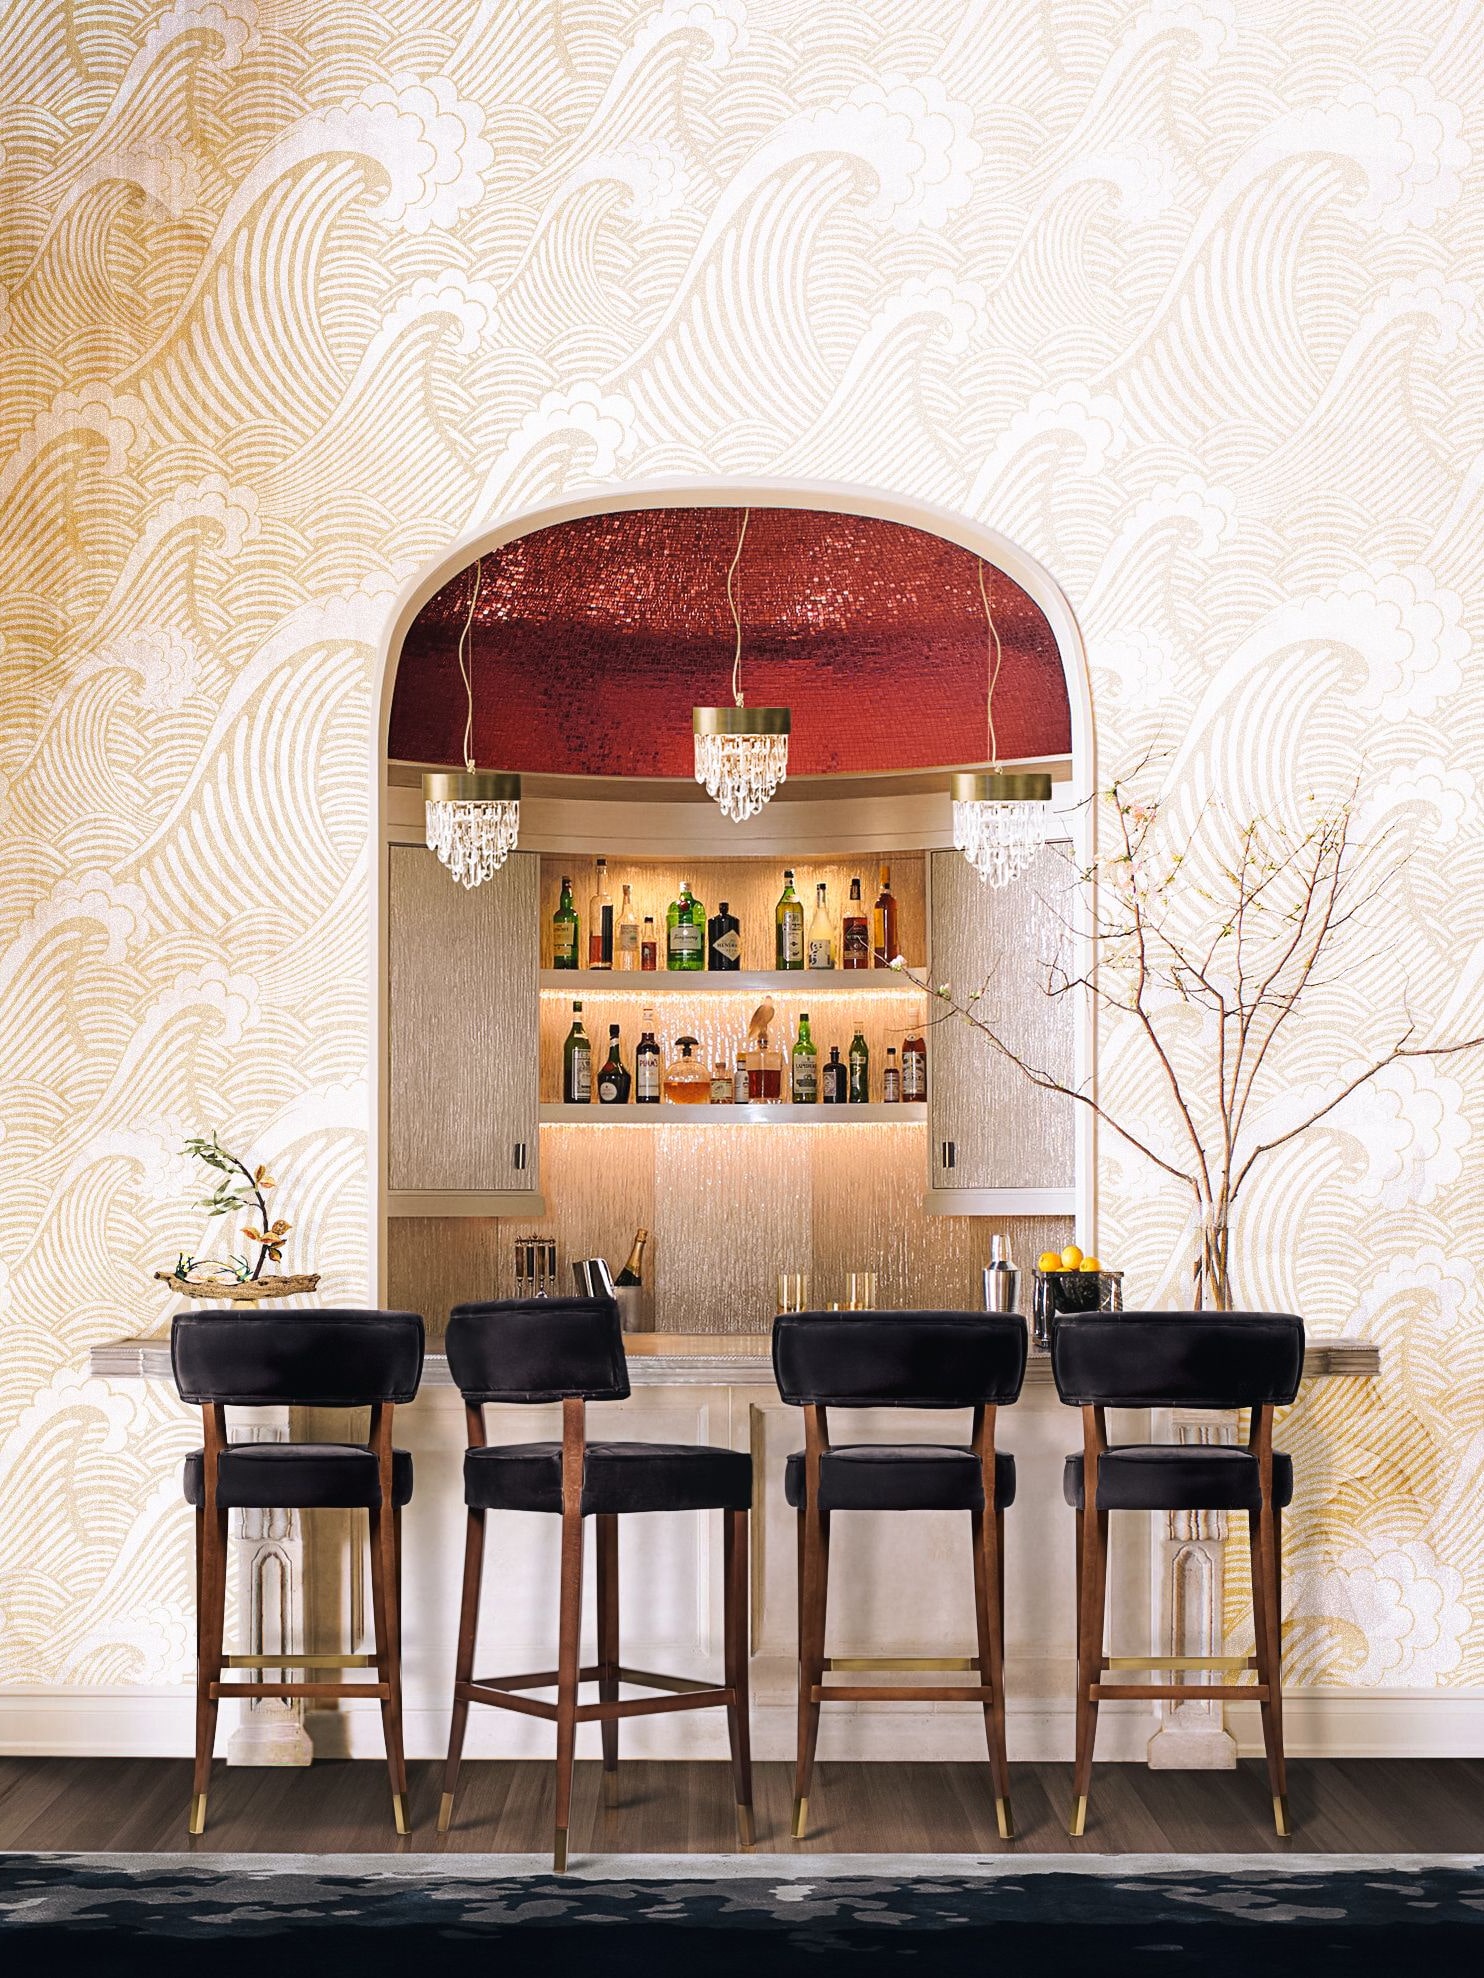 Modern Bar Decor With A Neutral Background - Home'Society